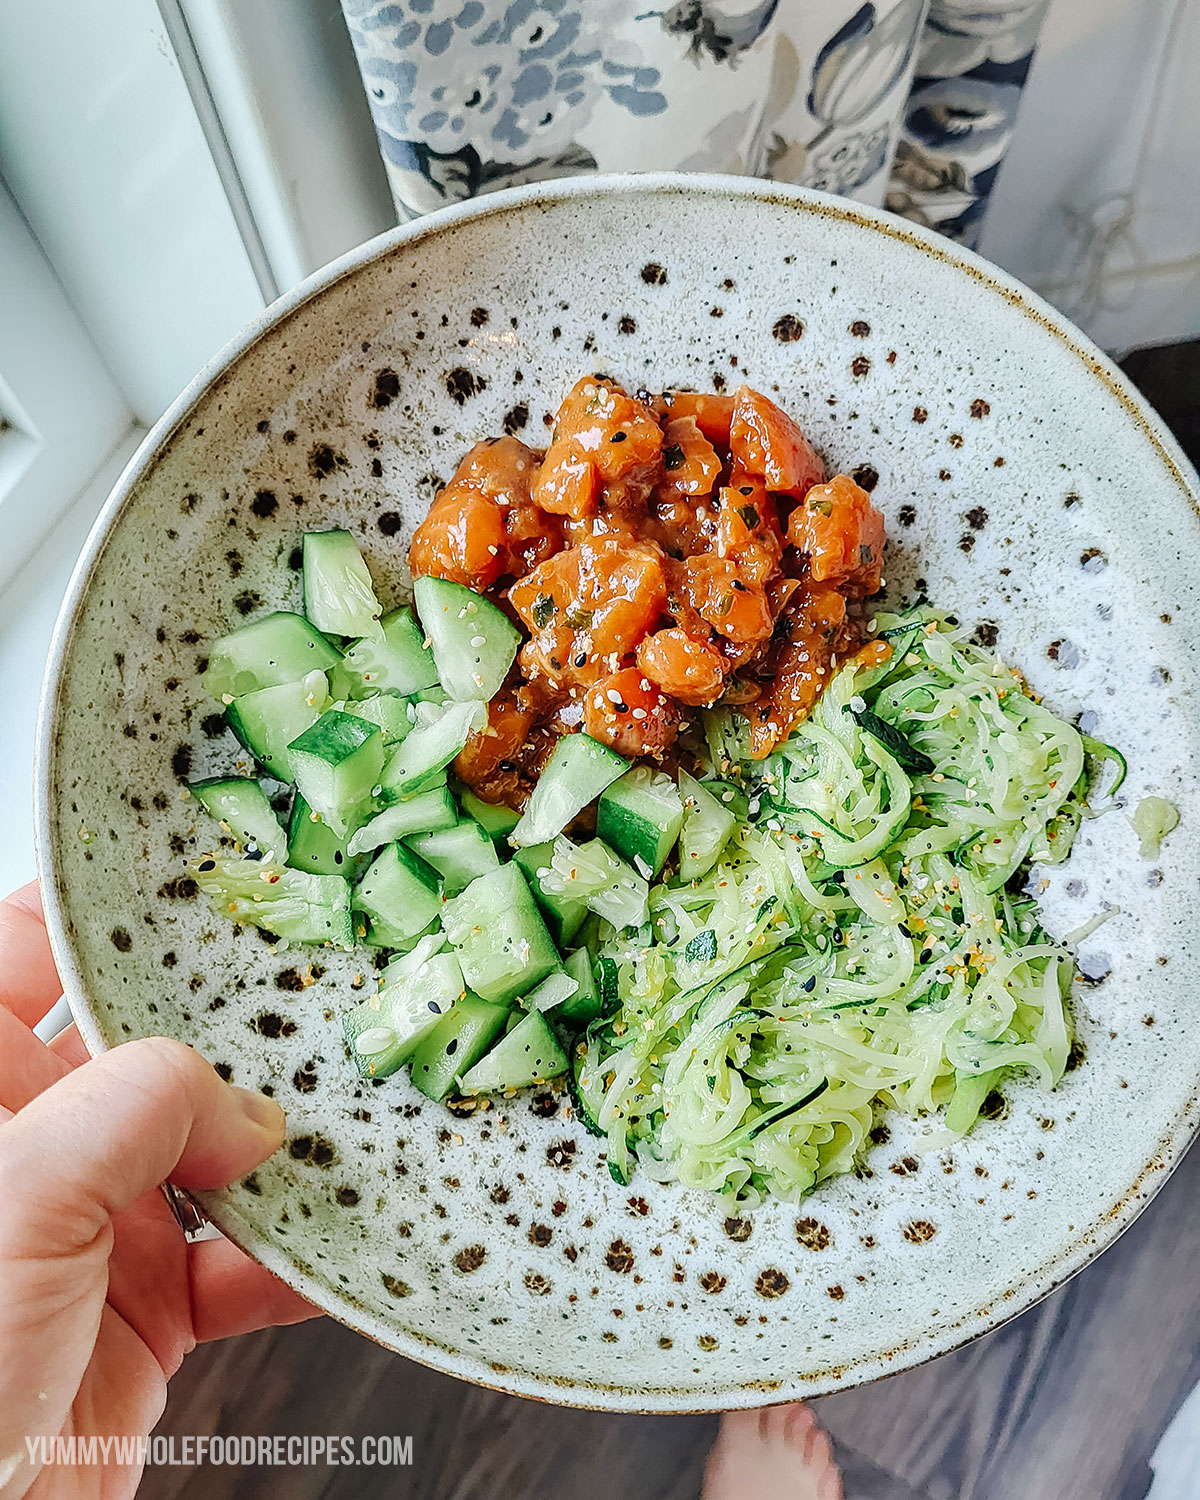 https://yummywholefoodrecipes.com/wp-content/uploads/2023/09/Zucchini-Noodles-vs-Pasta-and-How-to-Make-Them-1.jpg